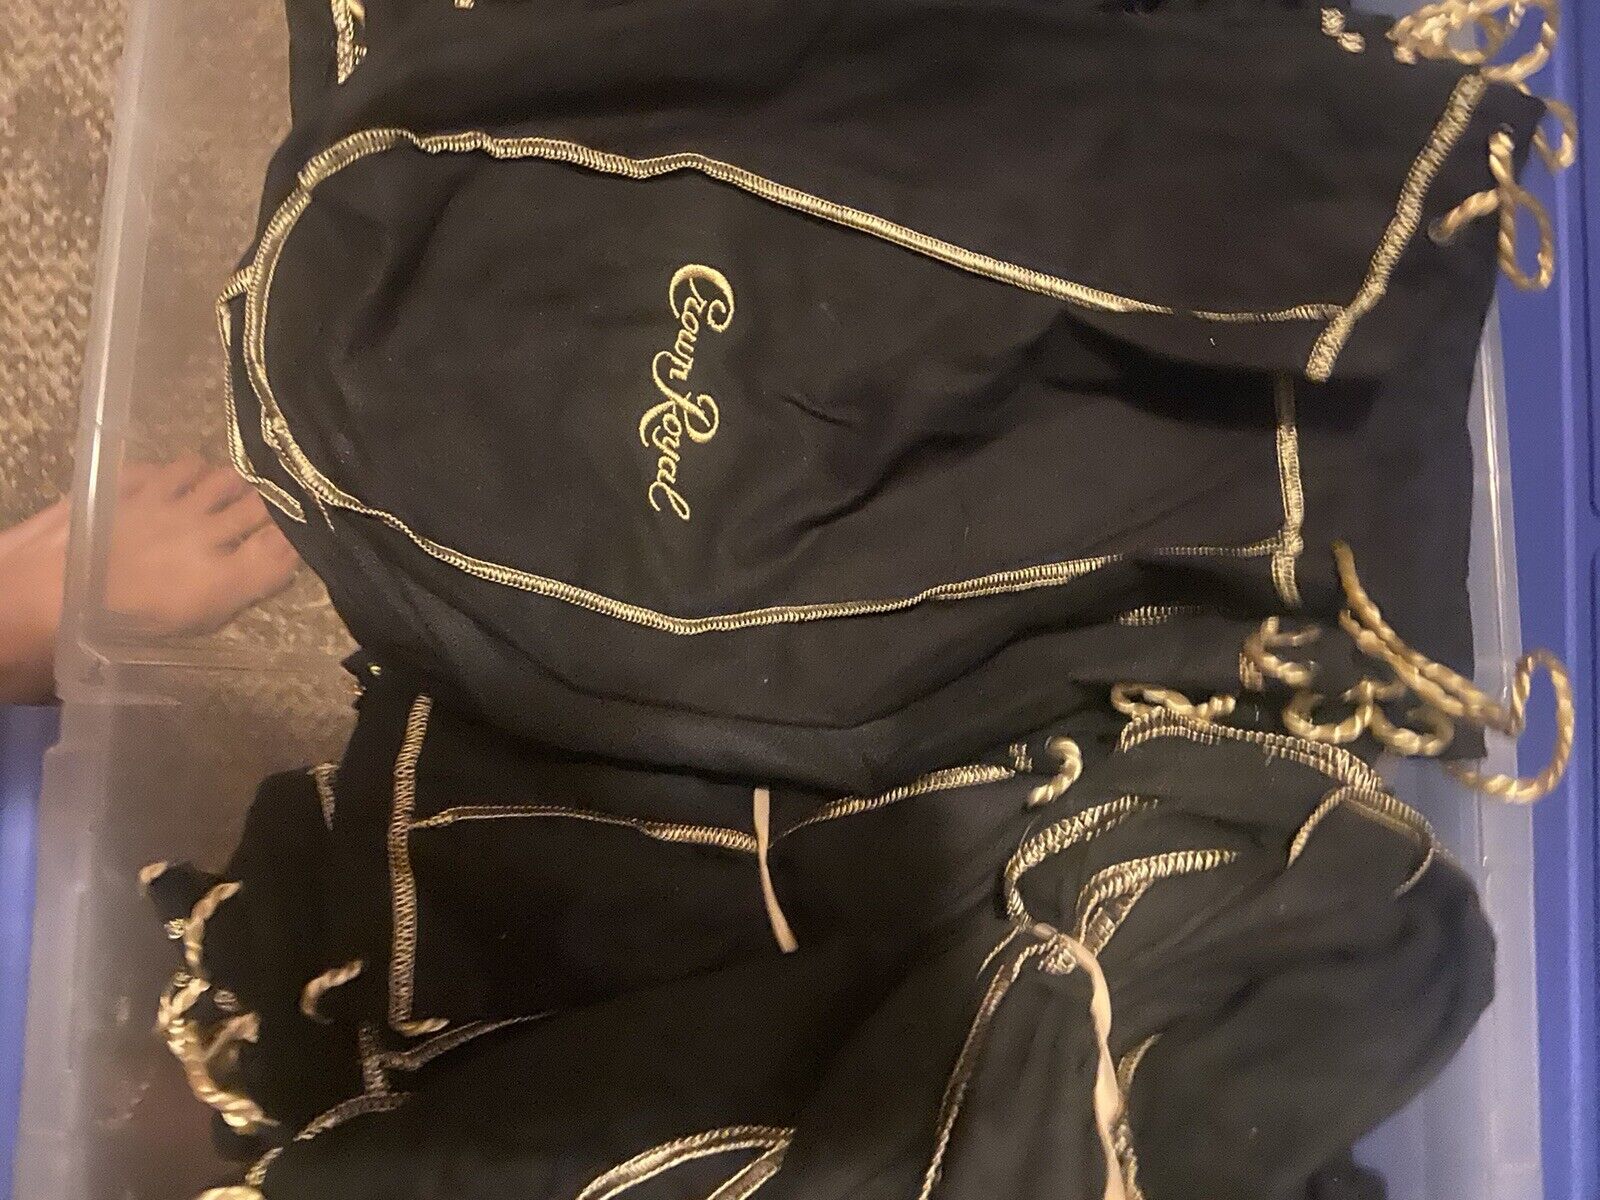 Lot: 25 BlackCrown Royal 12”1.75 Liter Drawstring Bags. Quilting/crafts/collect